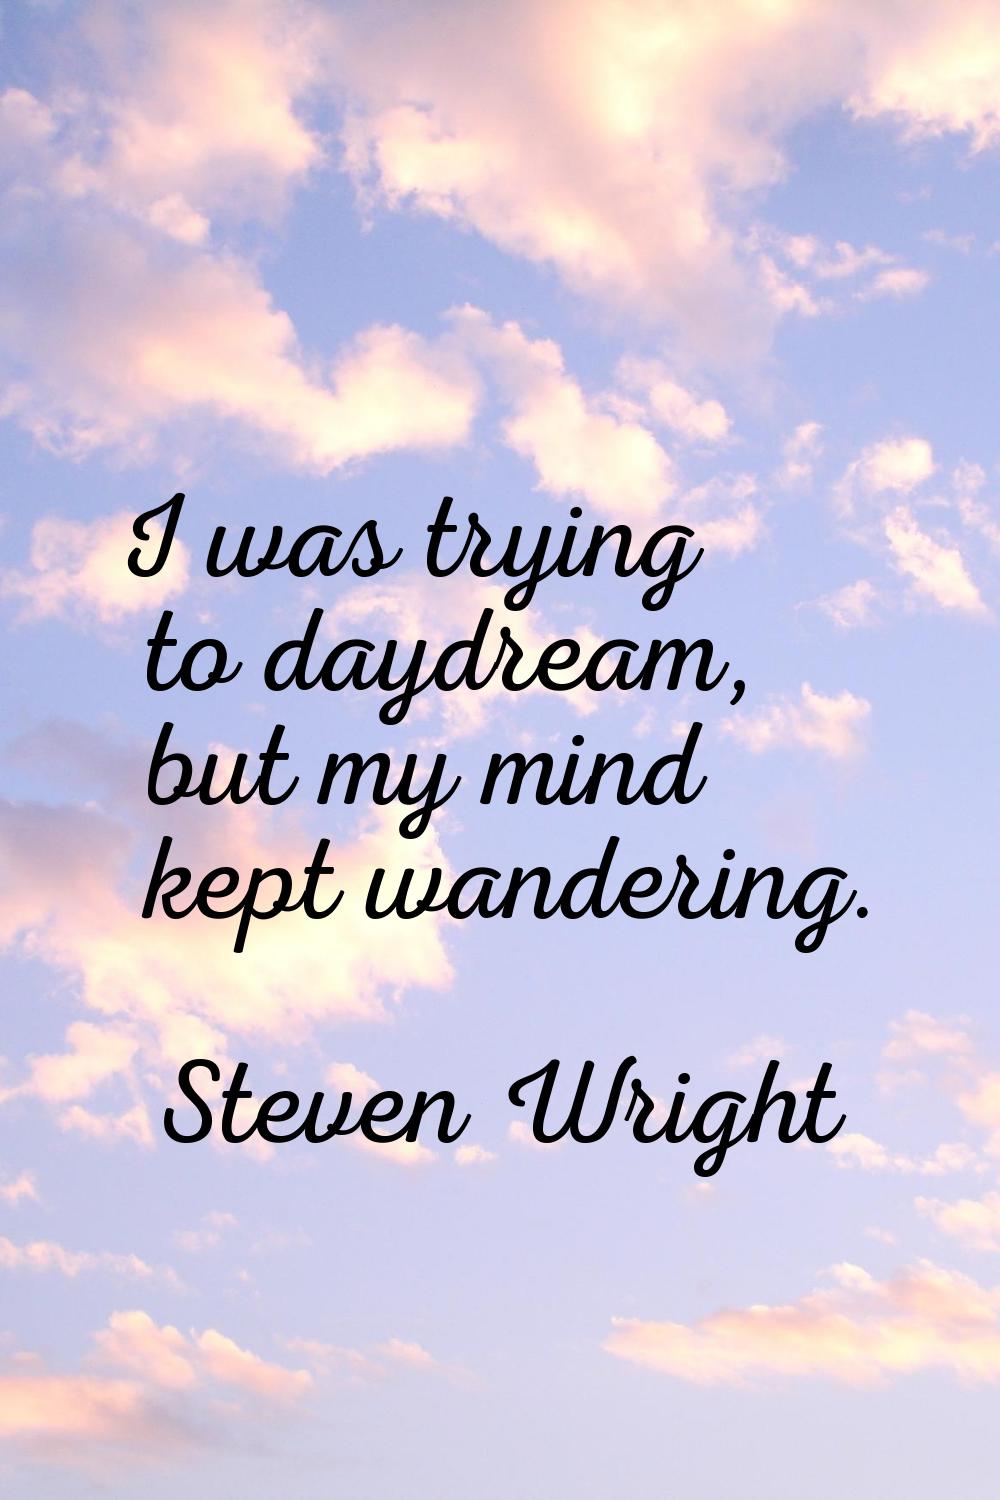 I was trying to daydream, but my mind kept wandering.